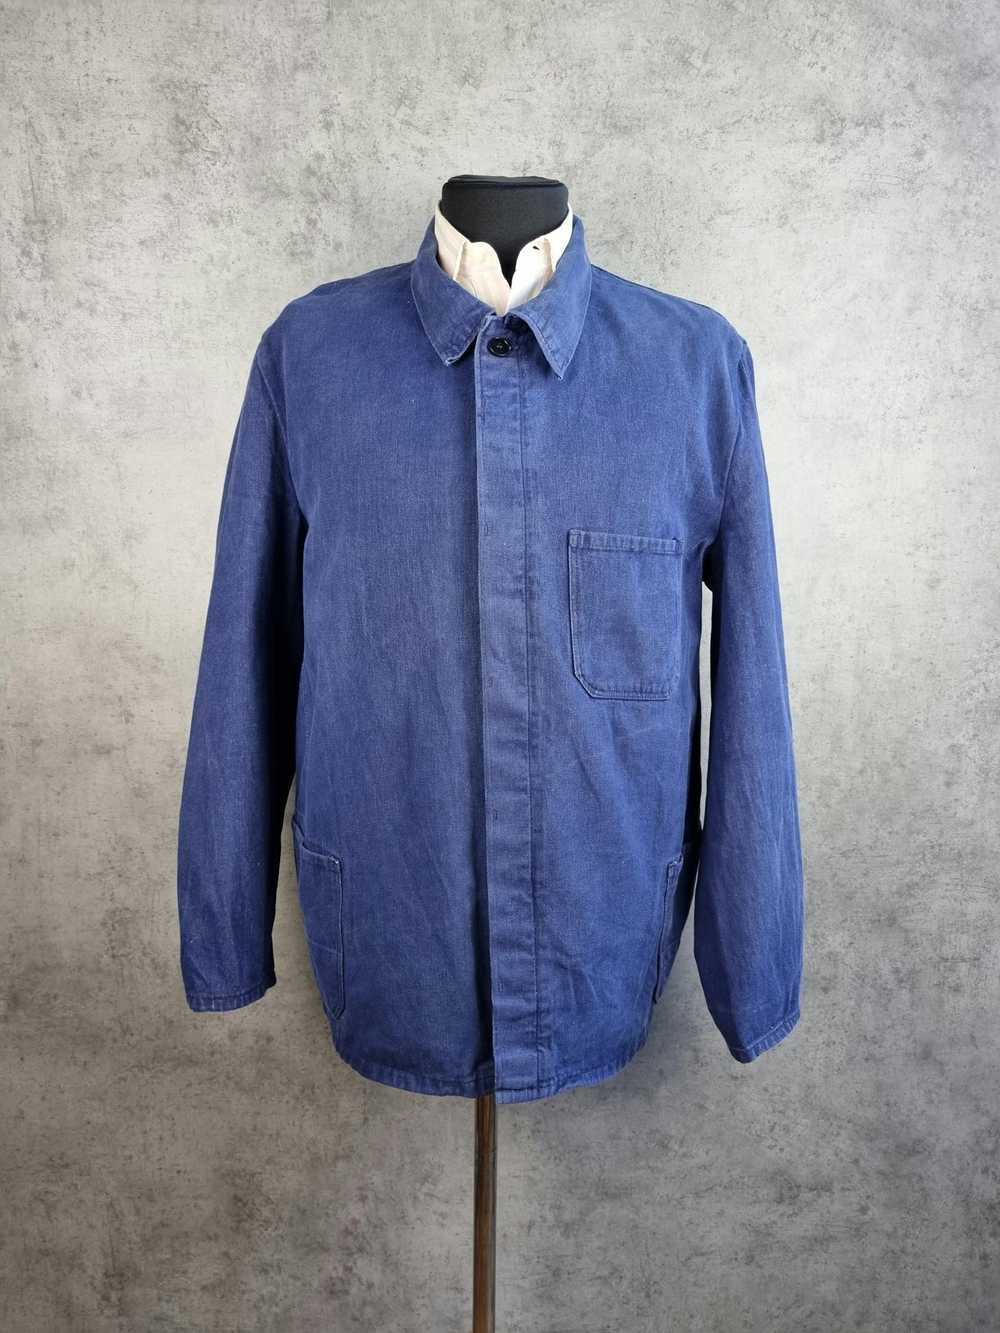 Le Laboureur × Vetra × Workers Rare Size 50s Work… - image 2